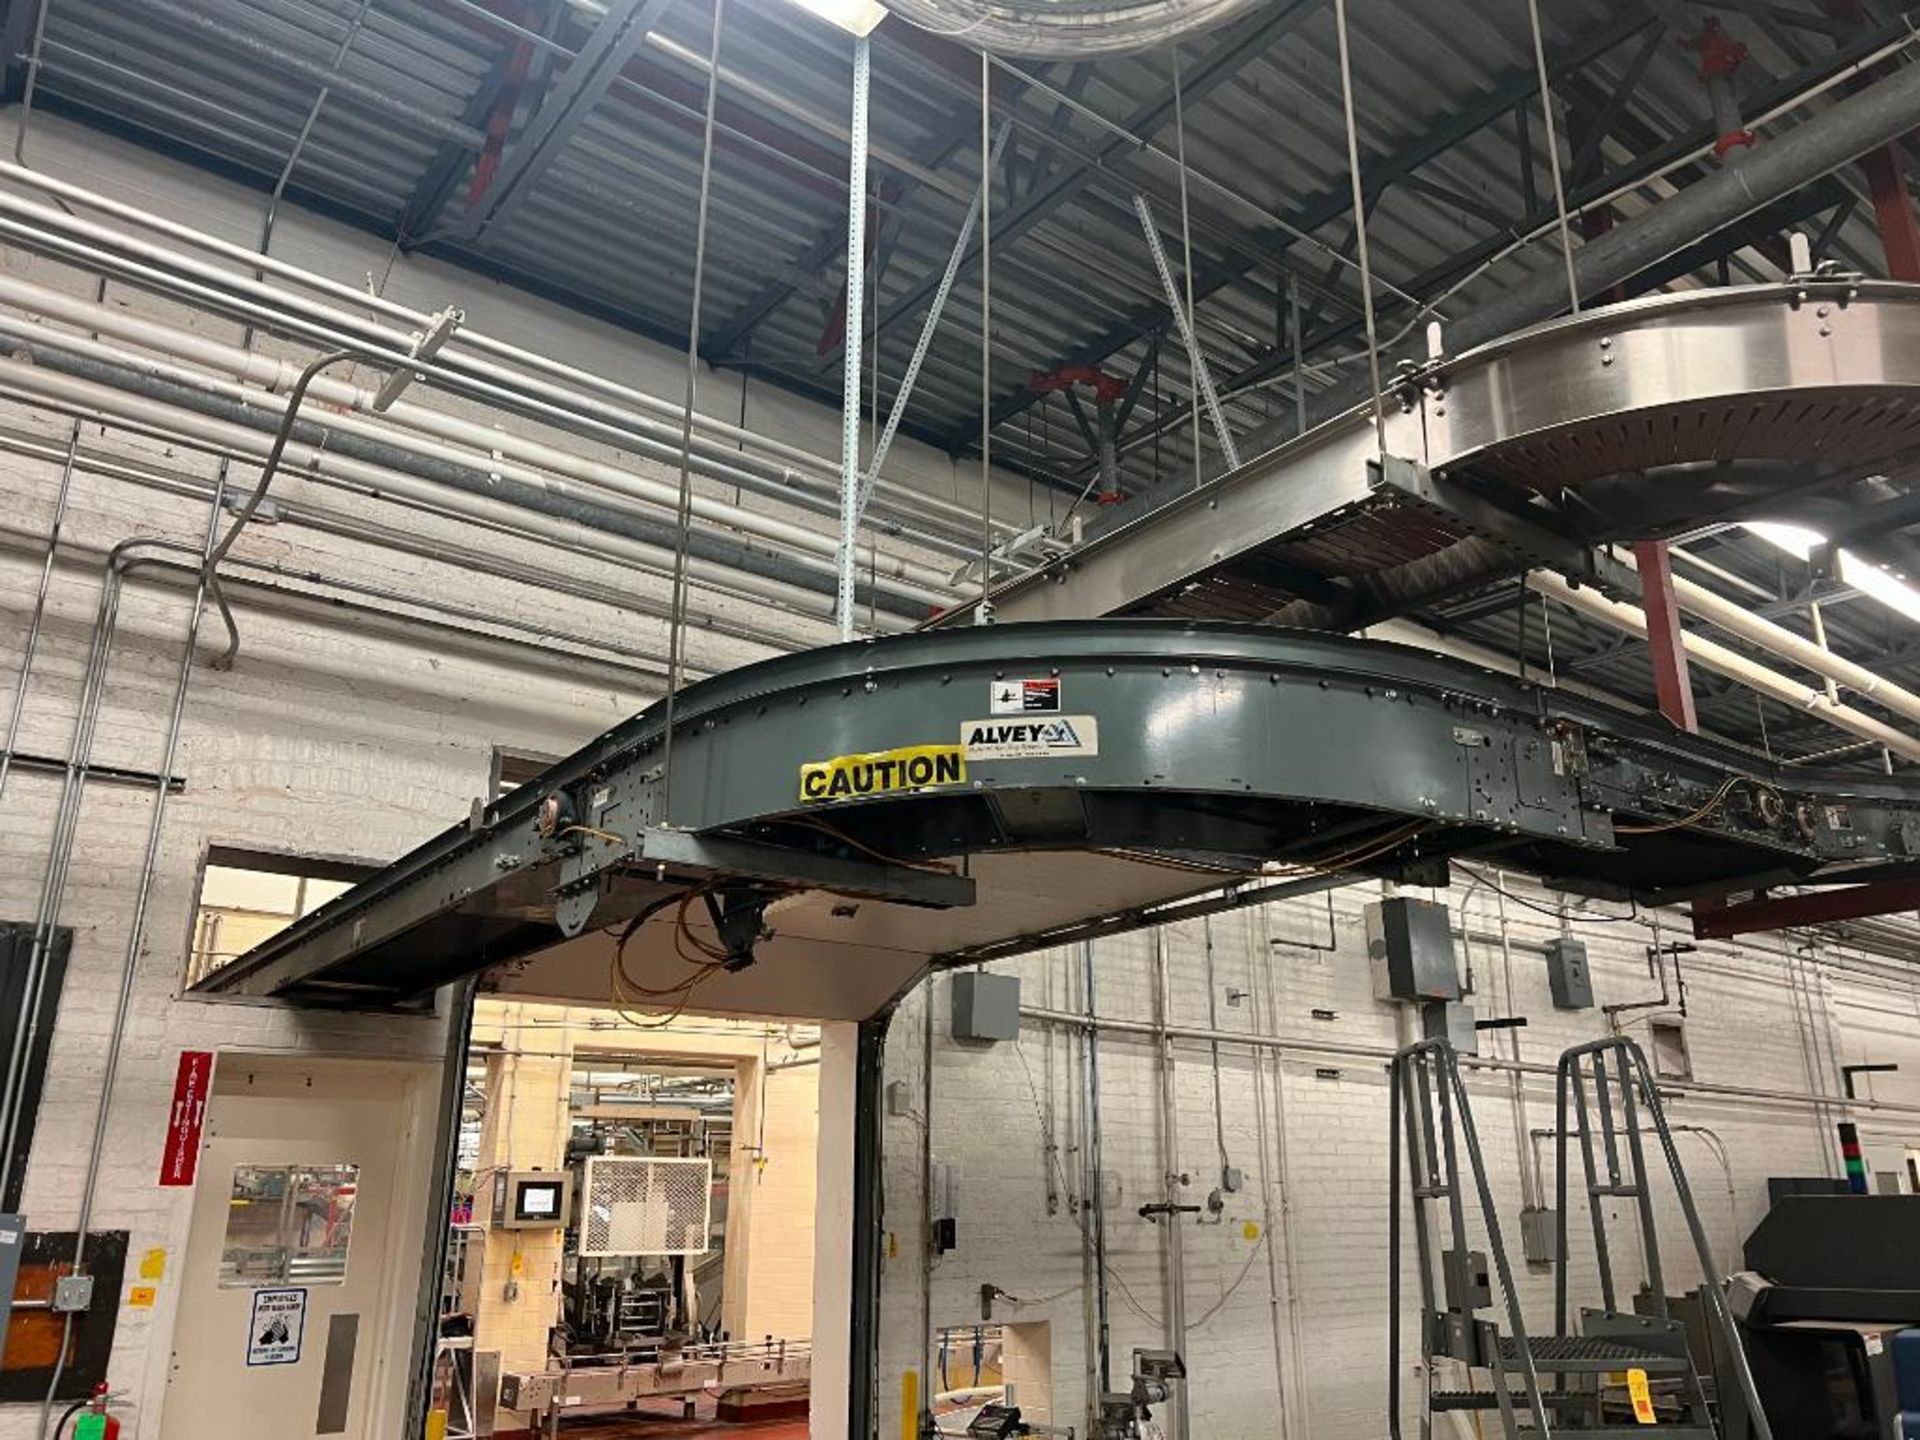 Alvey Material Handling Systems Overhead Conveyor with Drive - Rigging Fees: $3200 - Image 2 of 2